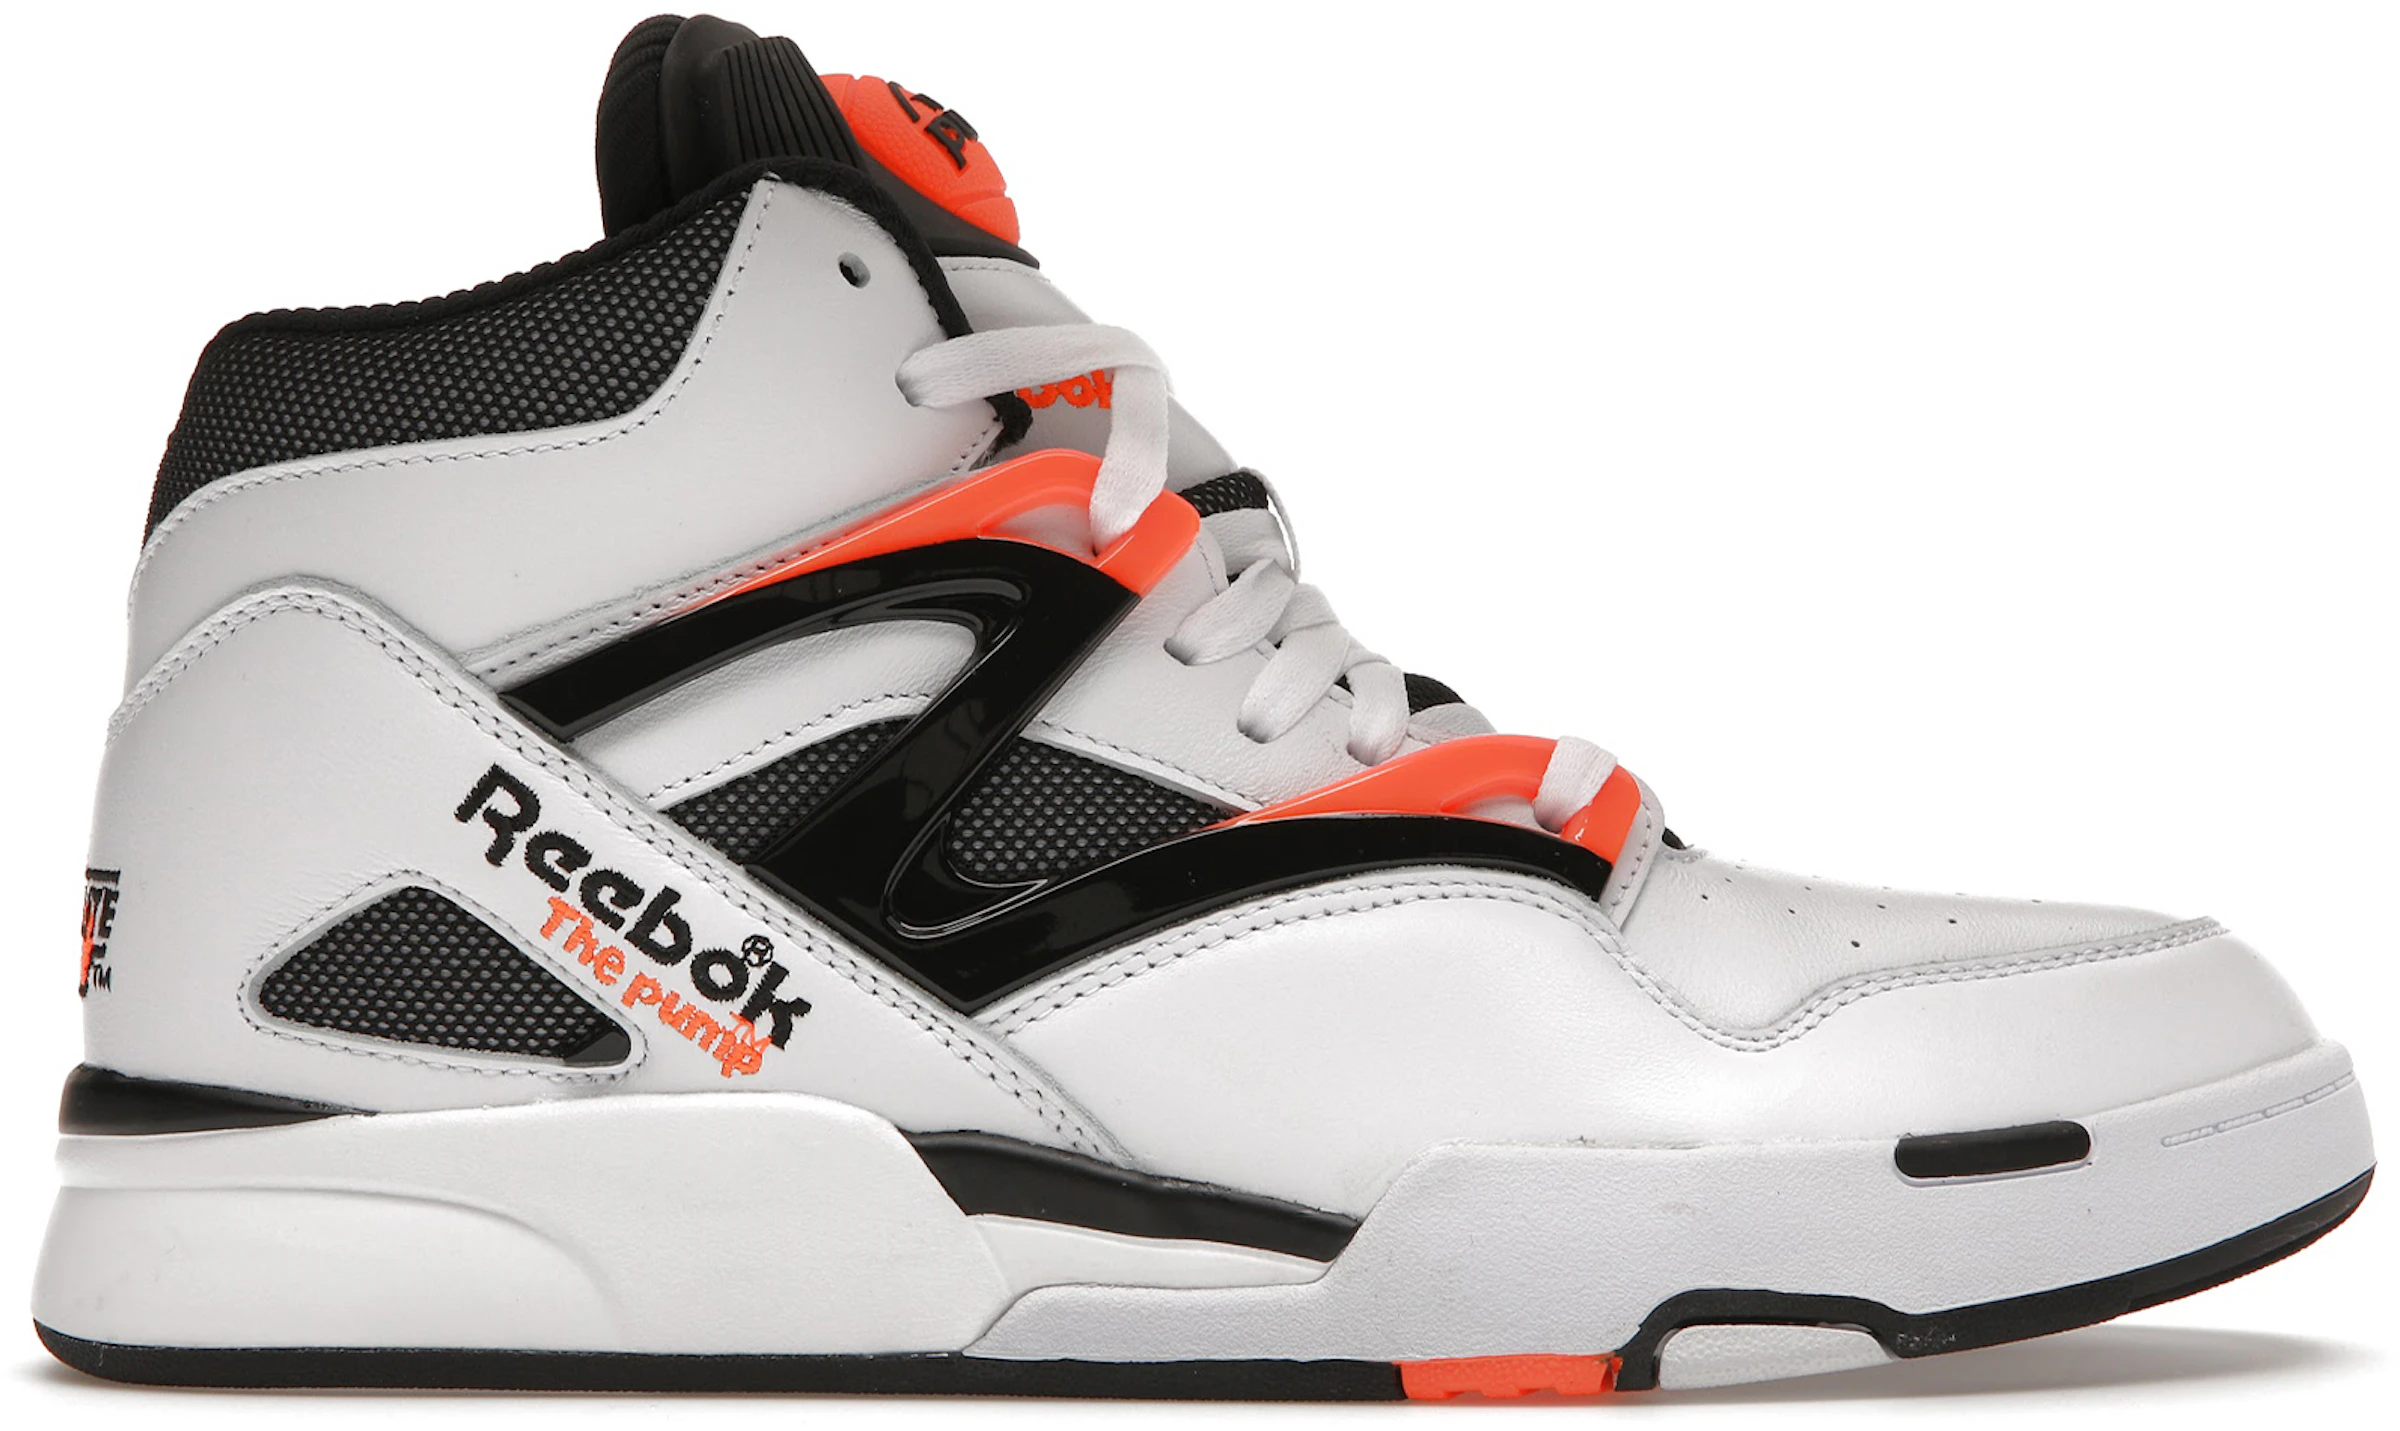 How The Reebok Pump Became An Iconic Shoe Sports Illustrated | art-kk.com